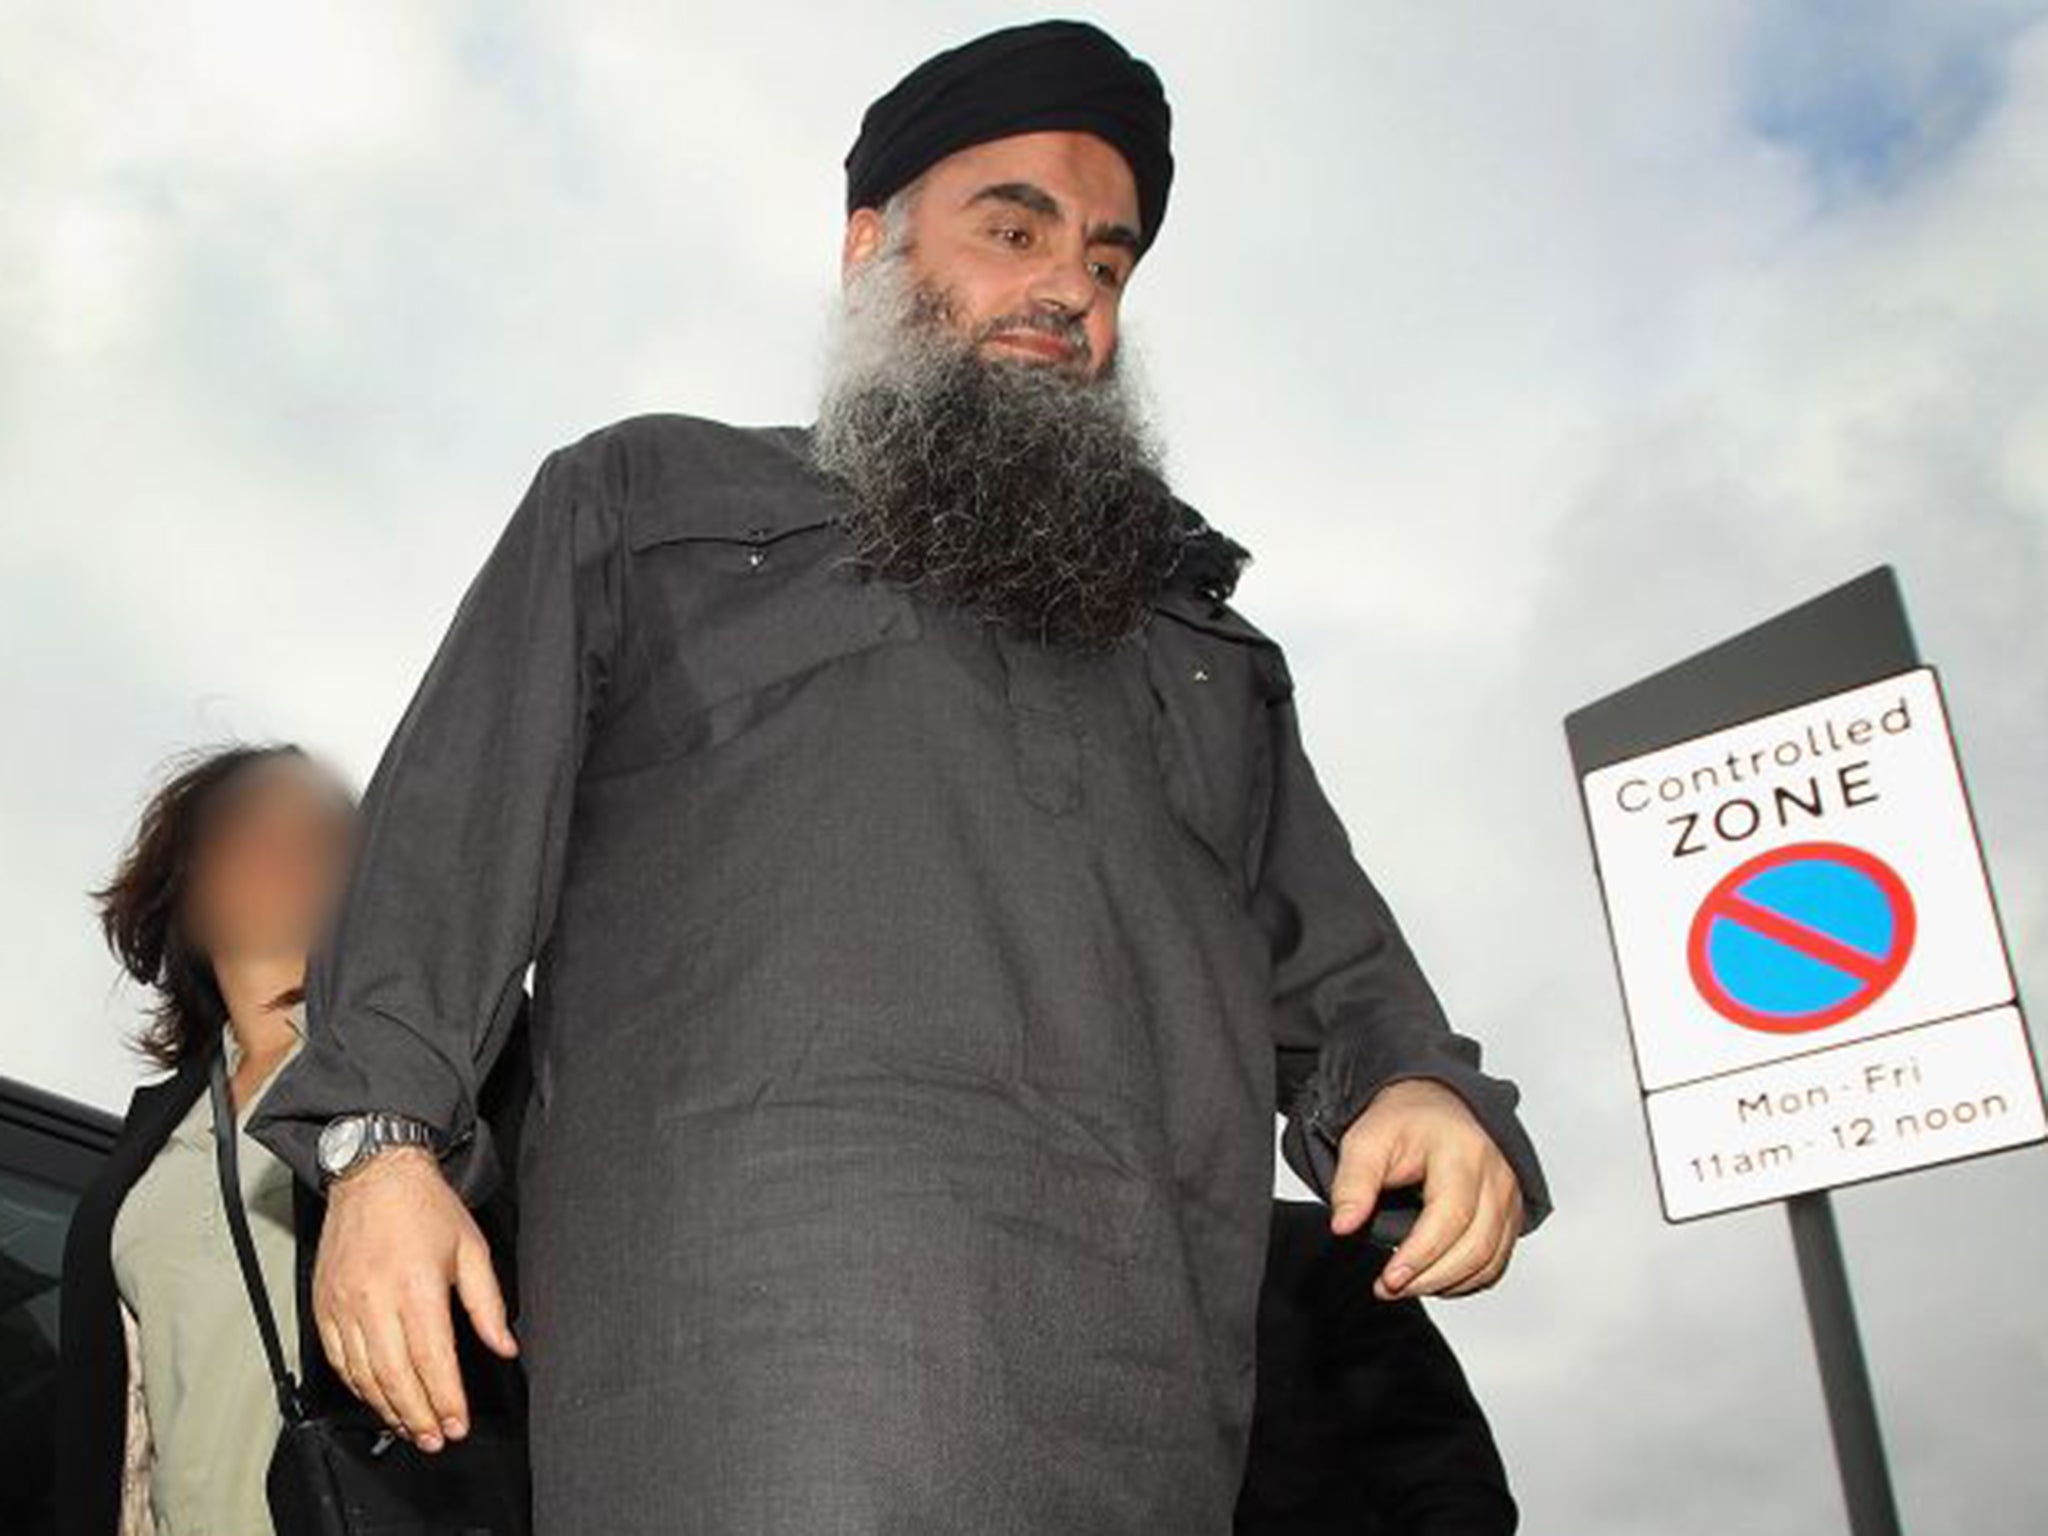 Muslim cleric Abu Qatada arrives at his London home after being released from prison in November 2012